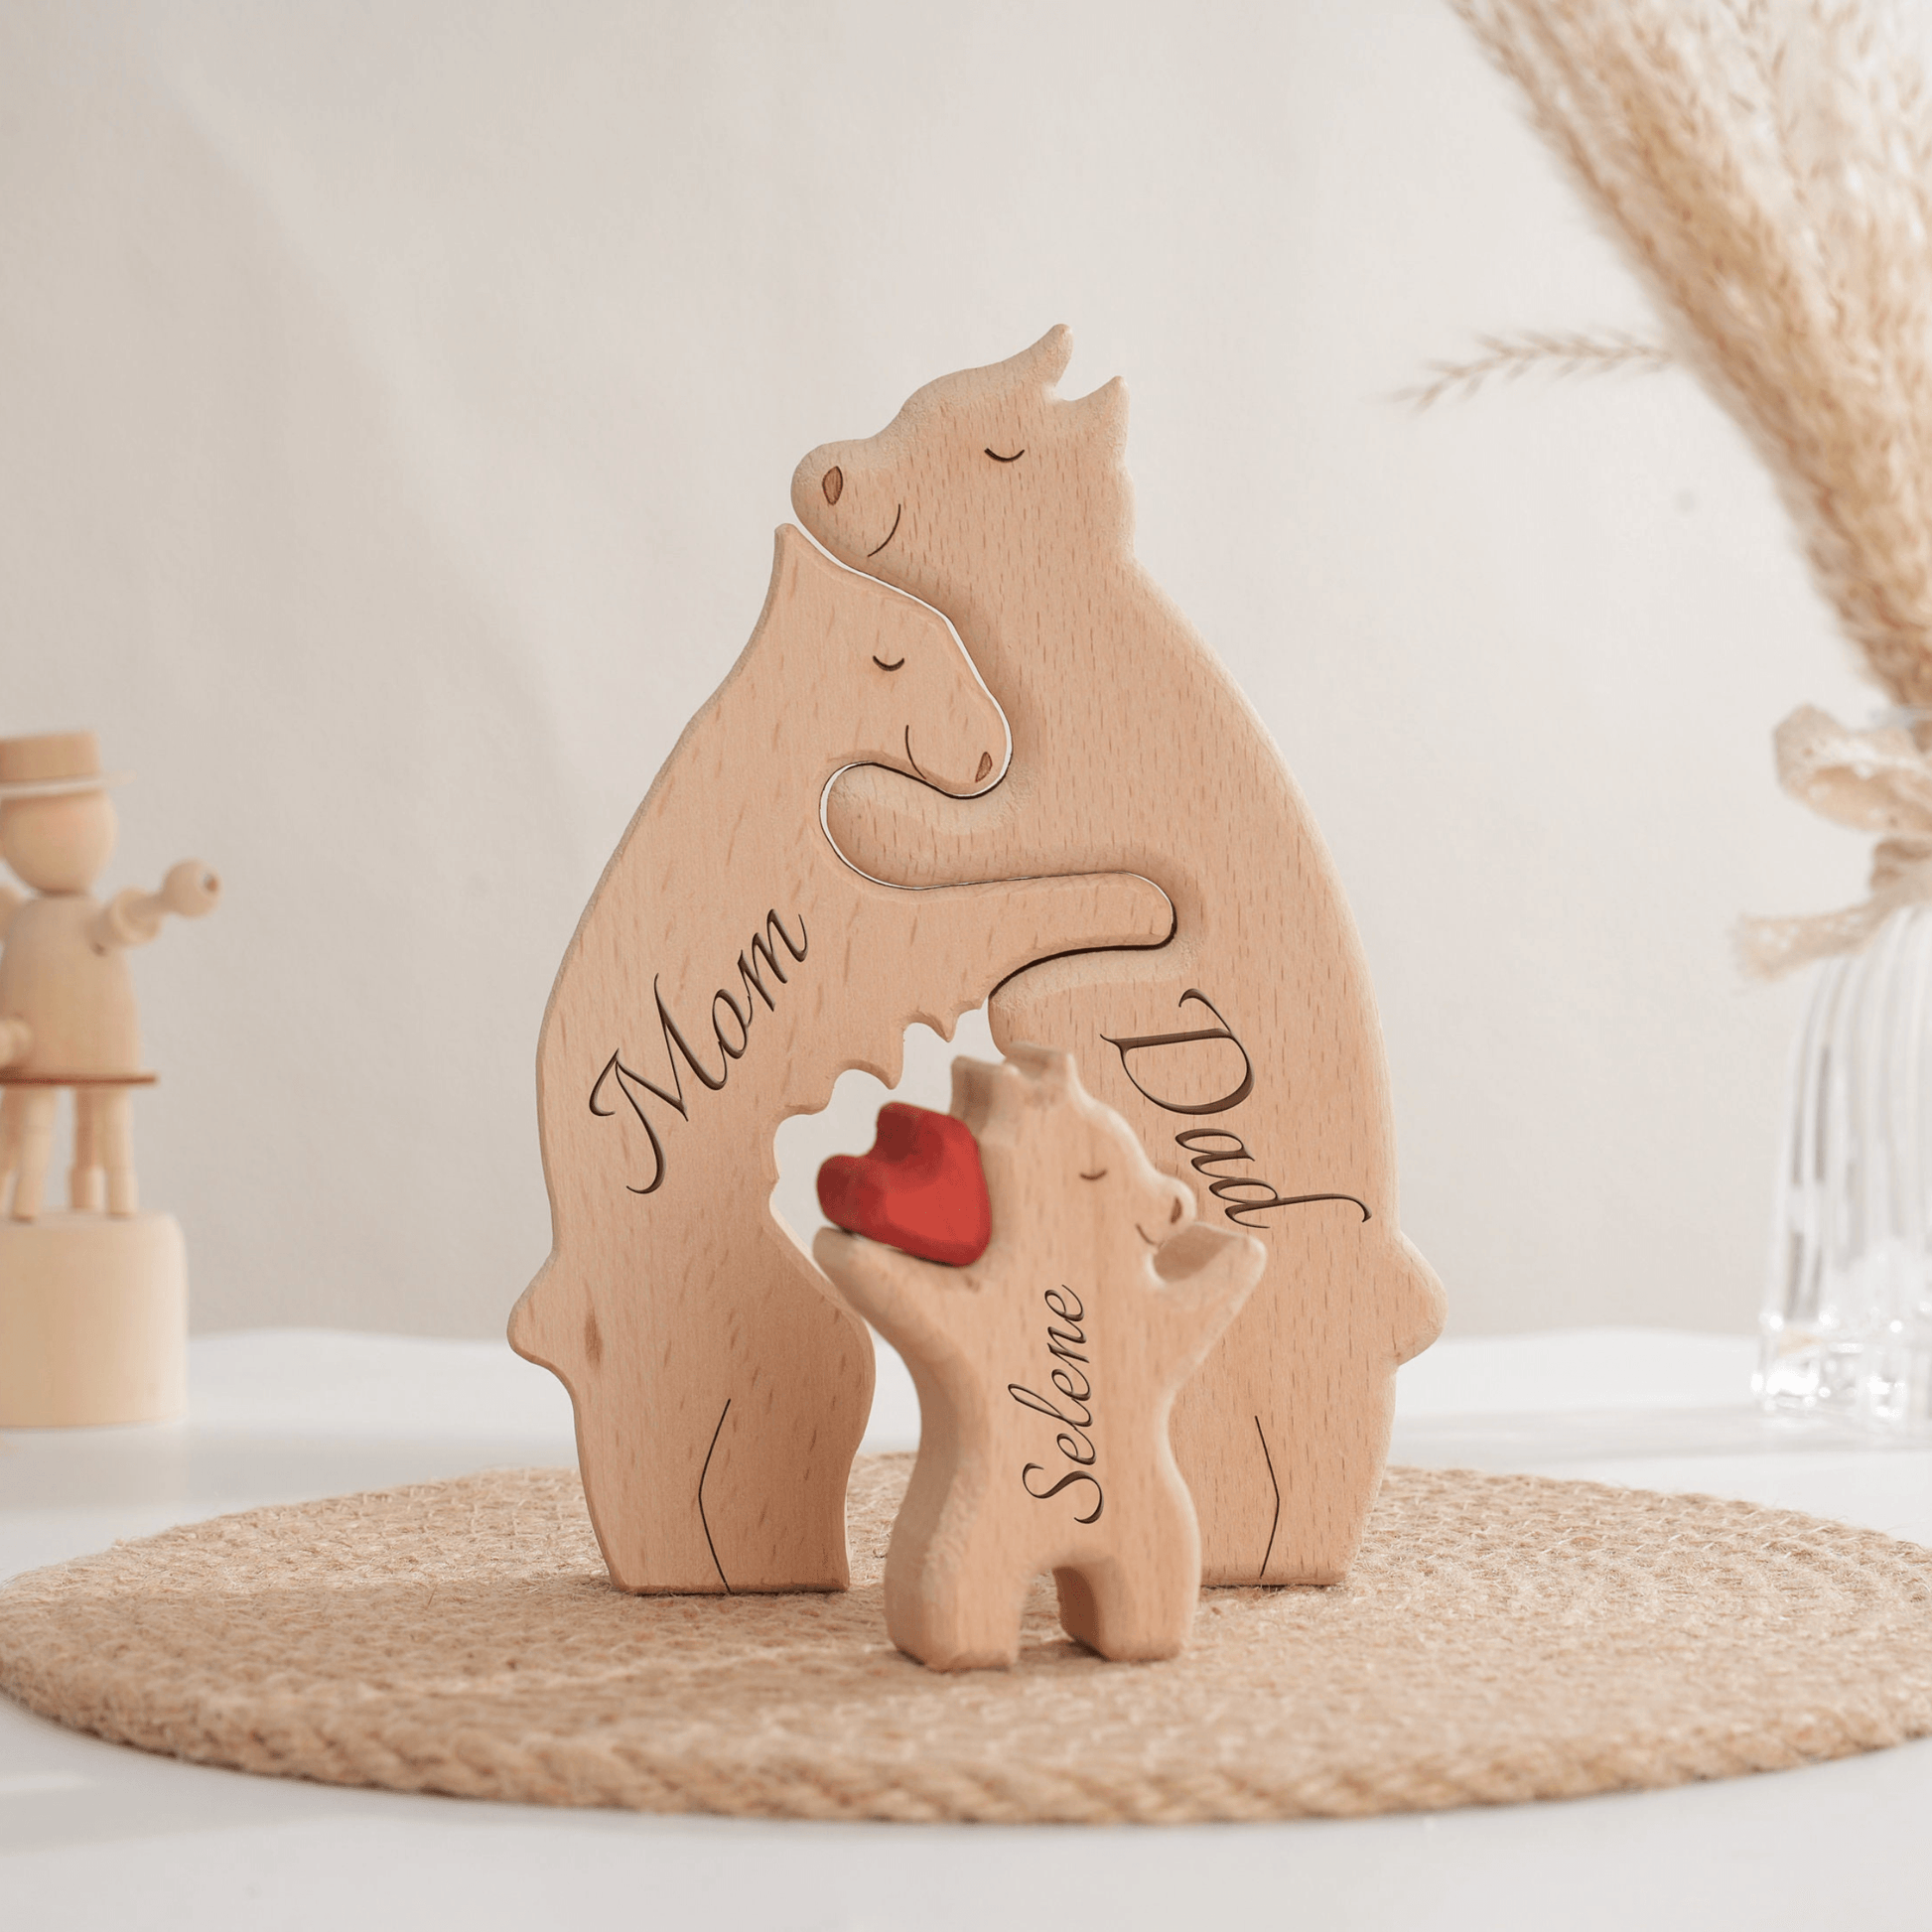 Bear Family Wooden Puzzle - Custom Family Name Gift for Parents and Children - GiftHaus